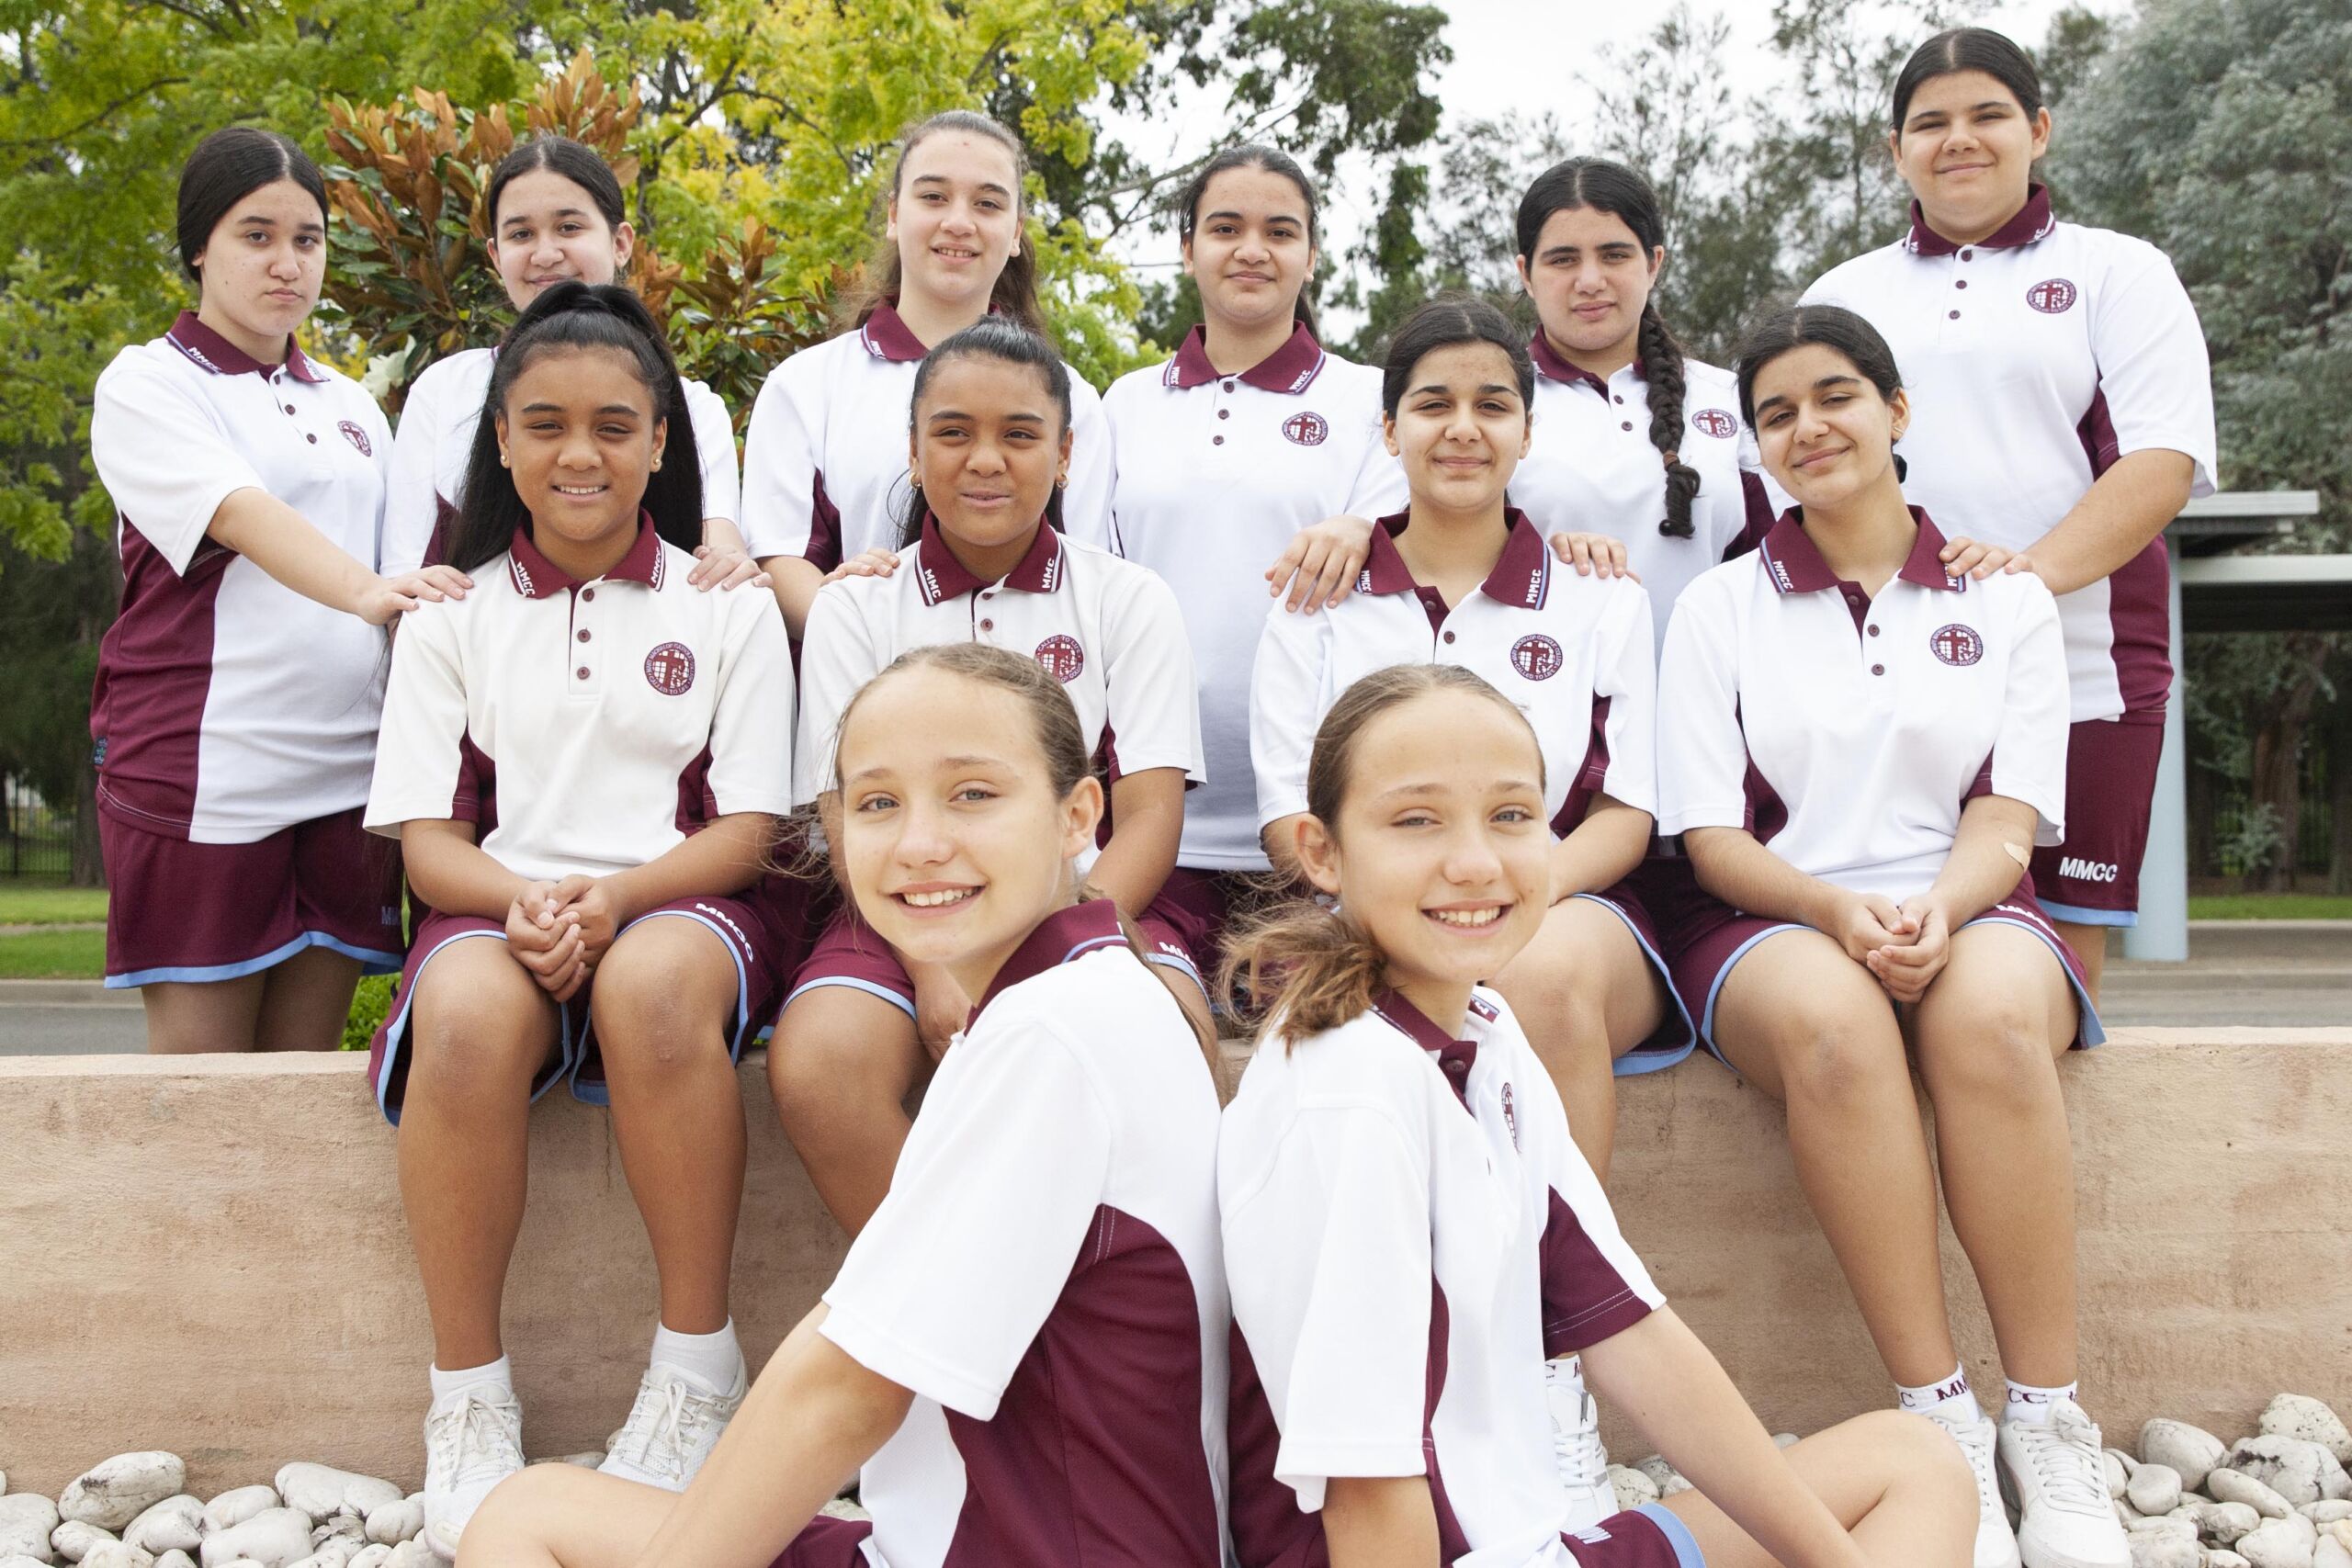 Mary MacKillop Catholic College wakeley welcomed six sets of twins to Year 7.